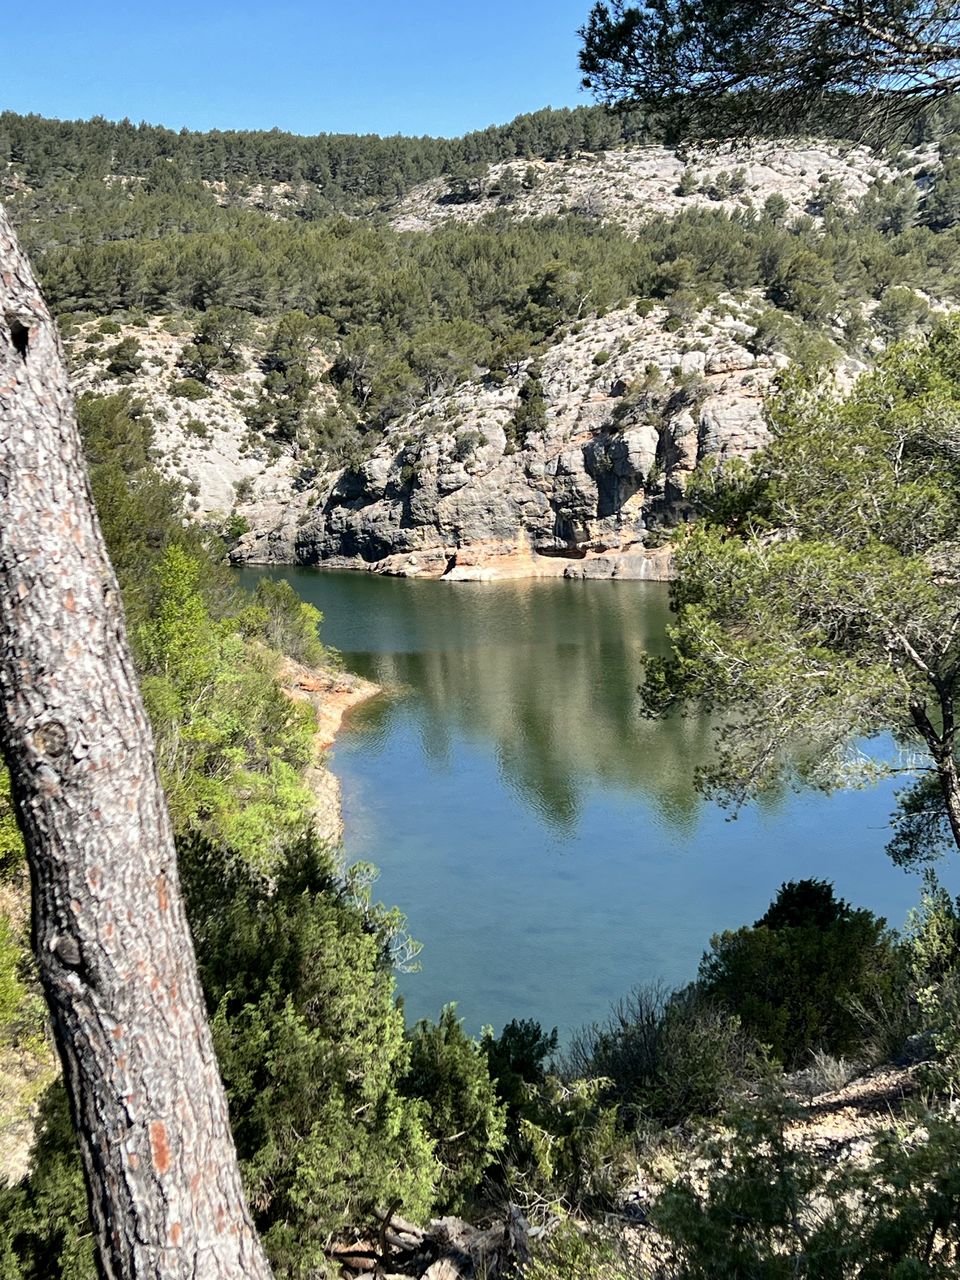 water, tree, plant, scenics - nature, nature, beauty in nature, wilderness, environment, tranquility, landscape, lake, sky, no people, tranquil scene, land, non-urban scene, mountain, travel destinations, pinaceae, day, clear sky, pine tree, coniferous tree, forest, outdoors, travel, reflection, blue, sunny, pine woodland, tourism, sunlight, rock, reservoir, idyllic, remote